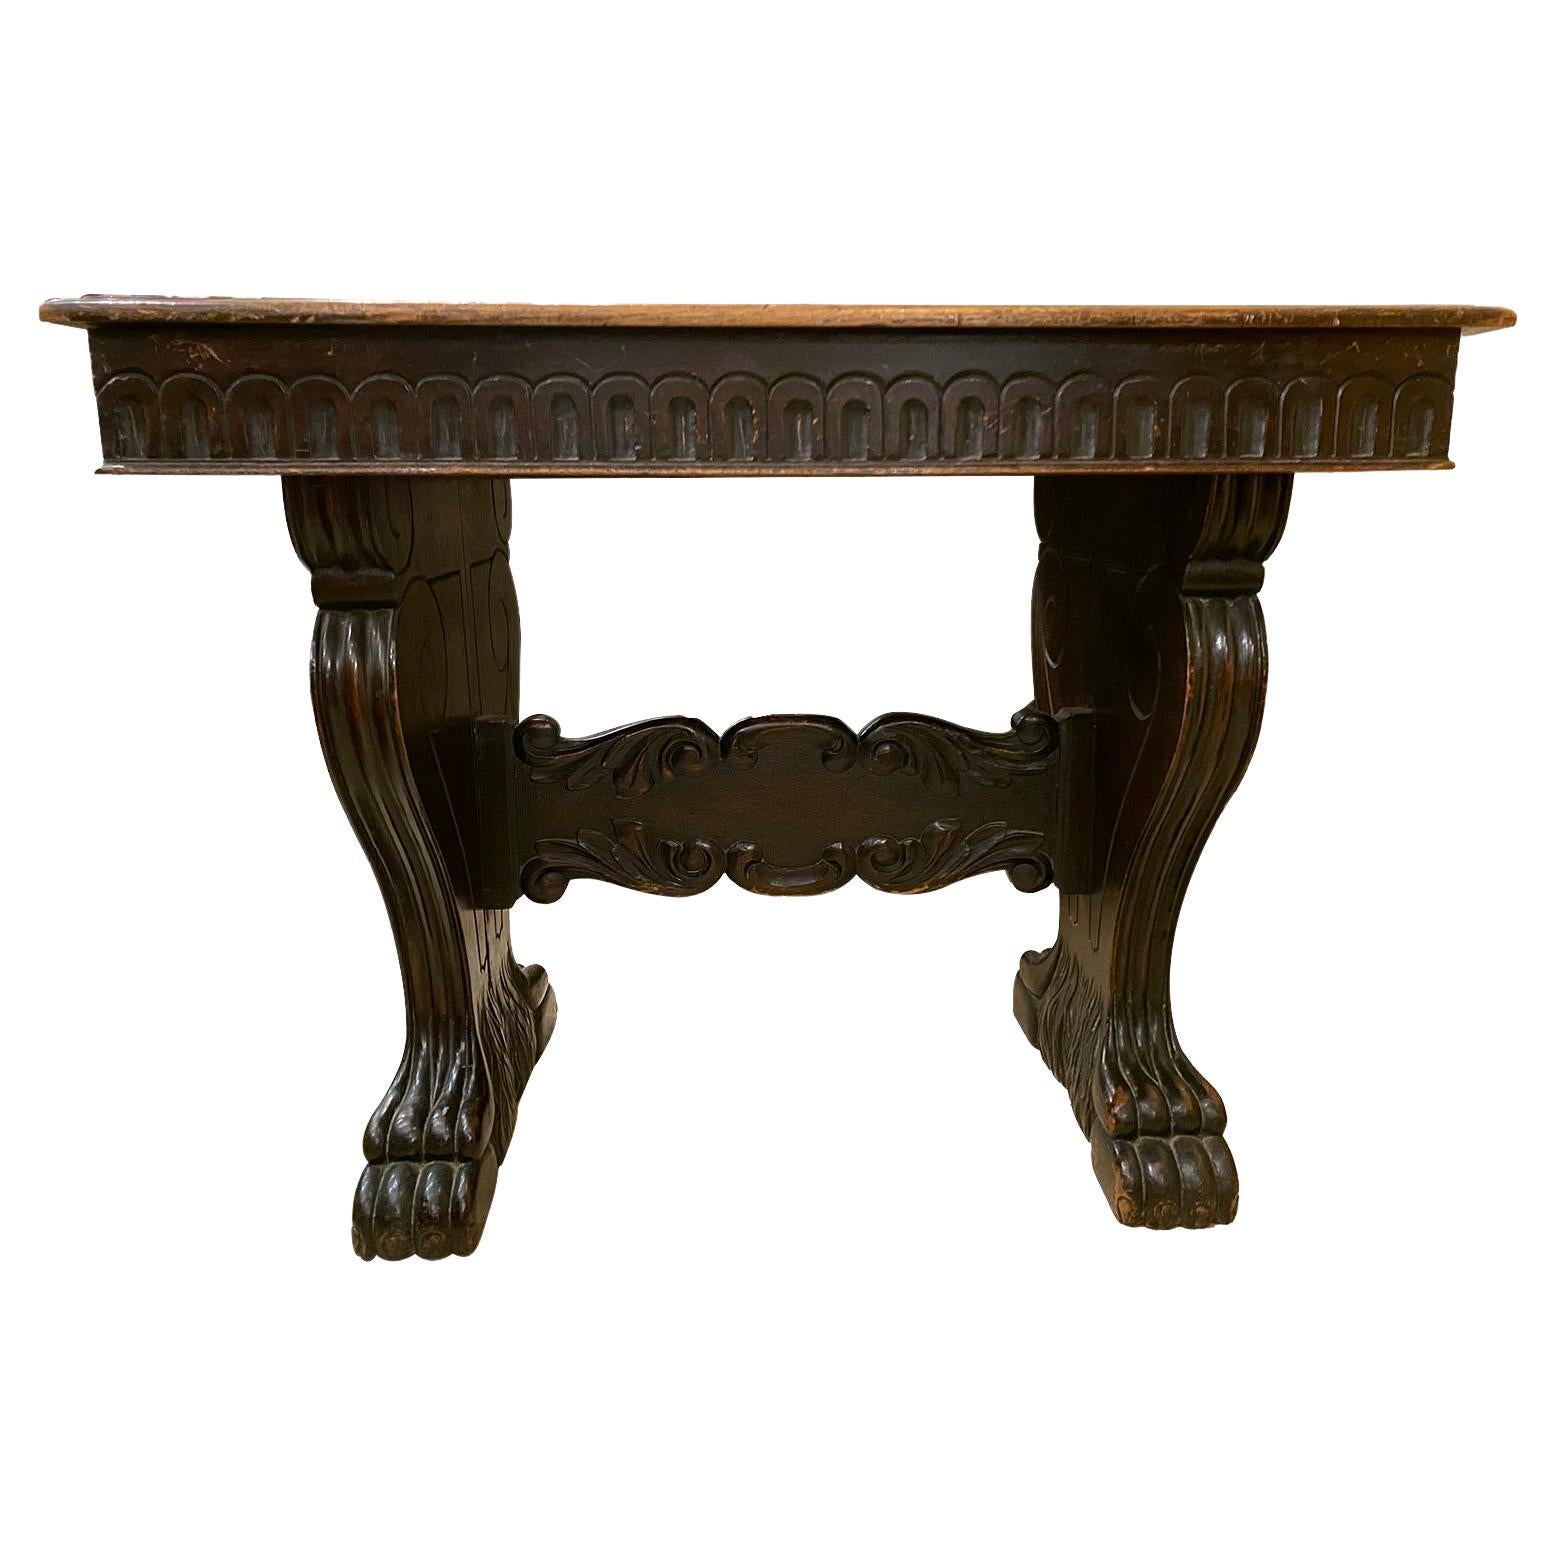 A circa 1900s Italian carved wood side table with lion's feet carving. 

Measurements:
Width 39.5